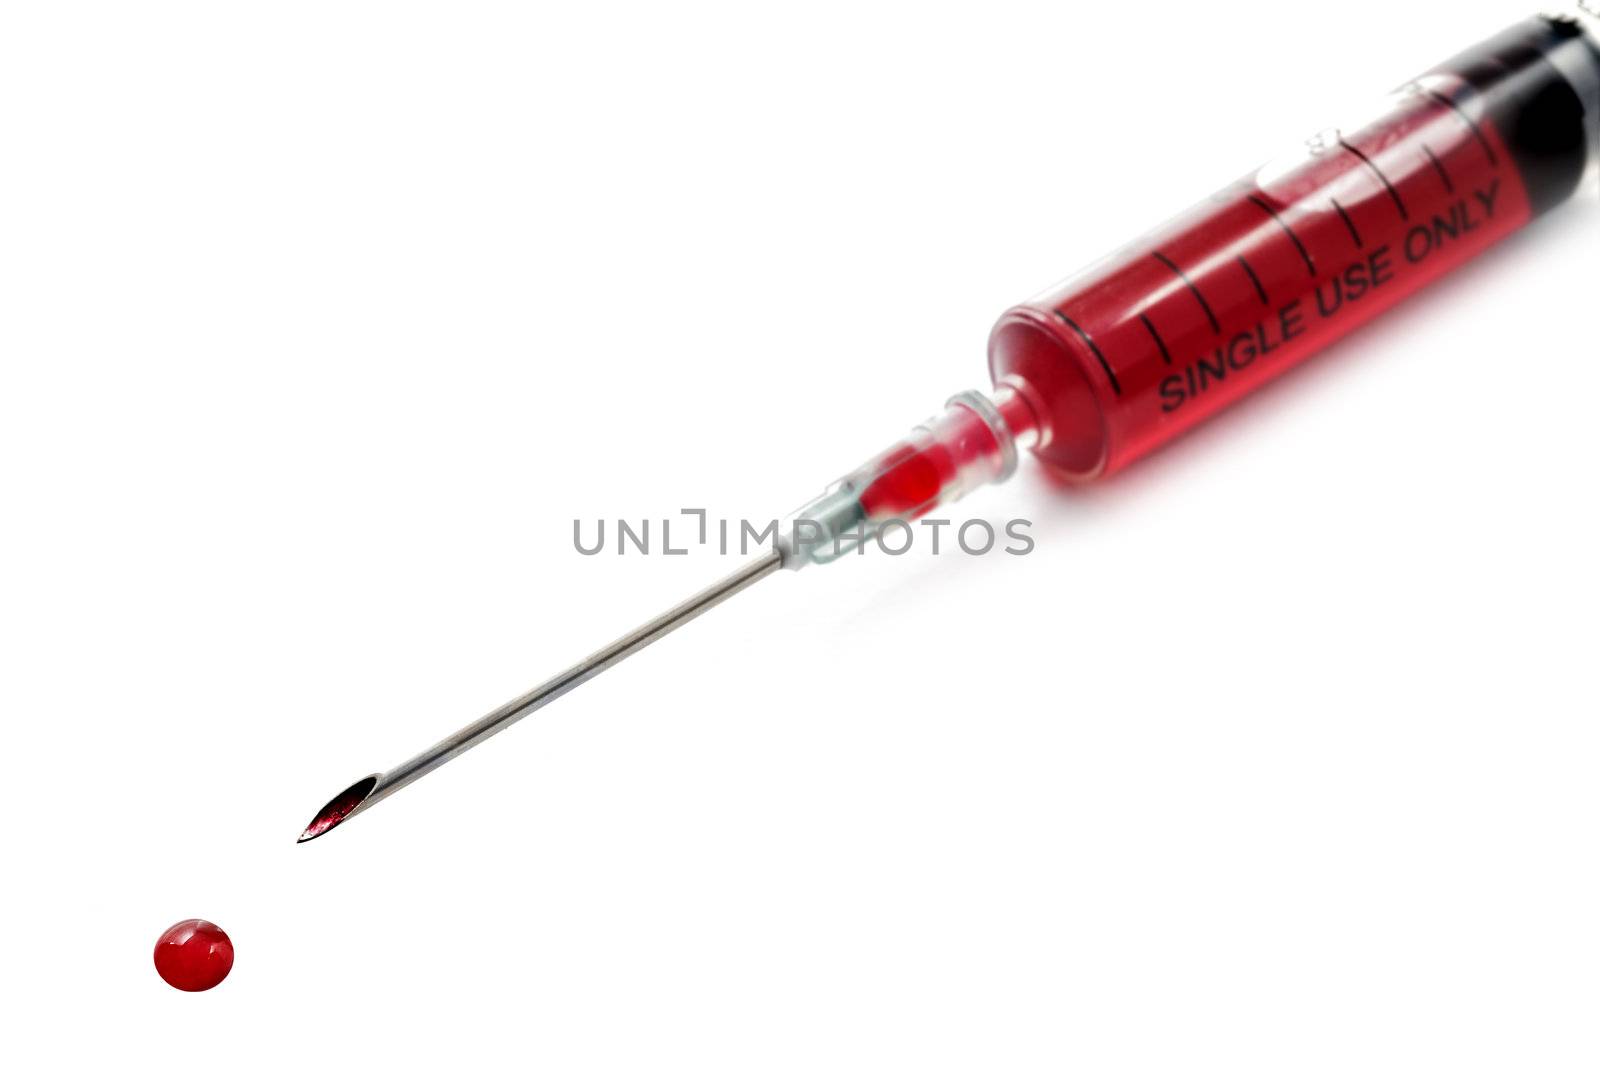 Syringe filled with blood on white